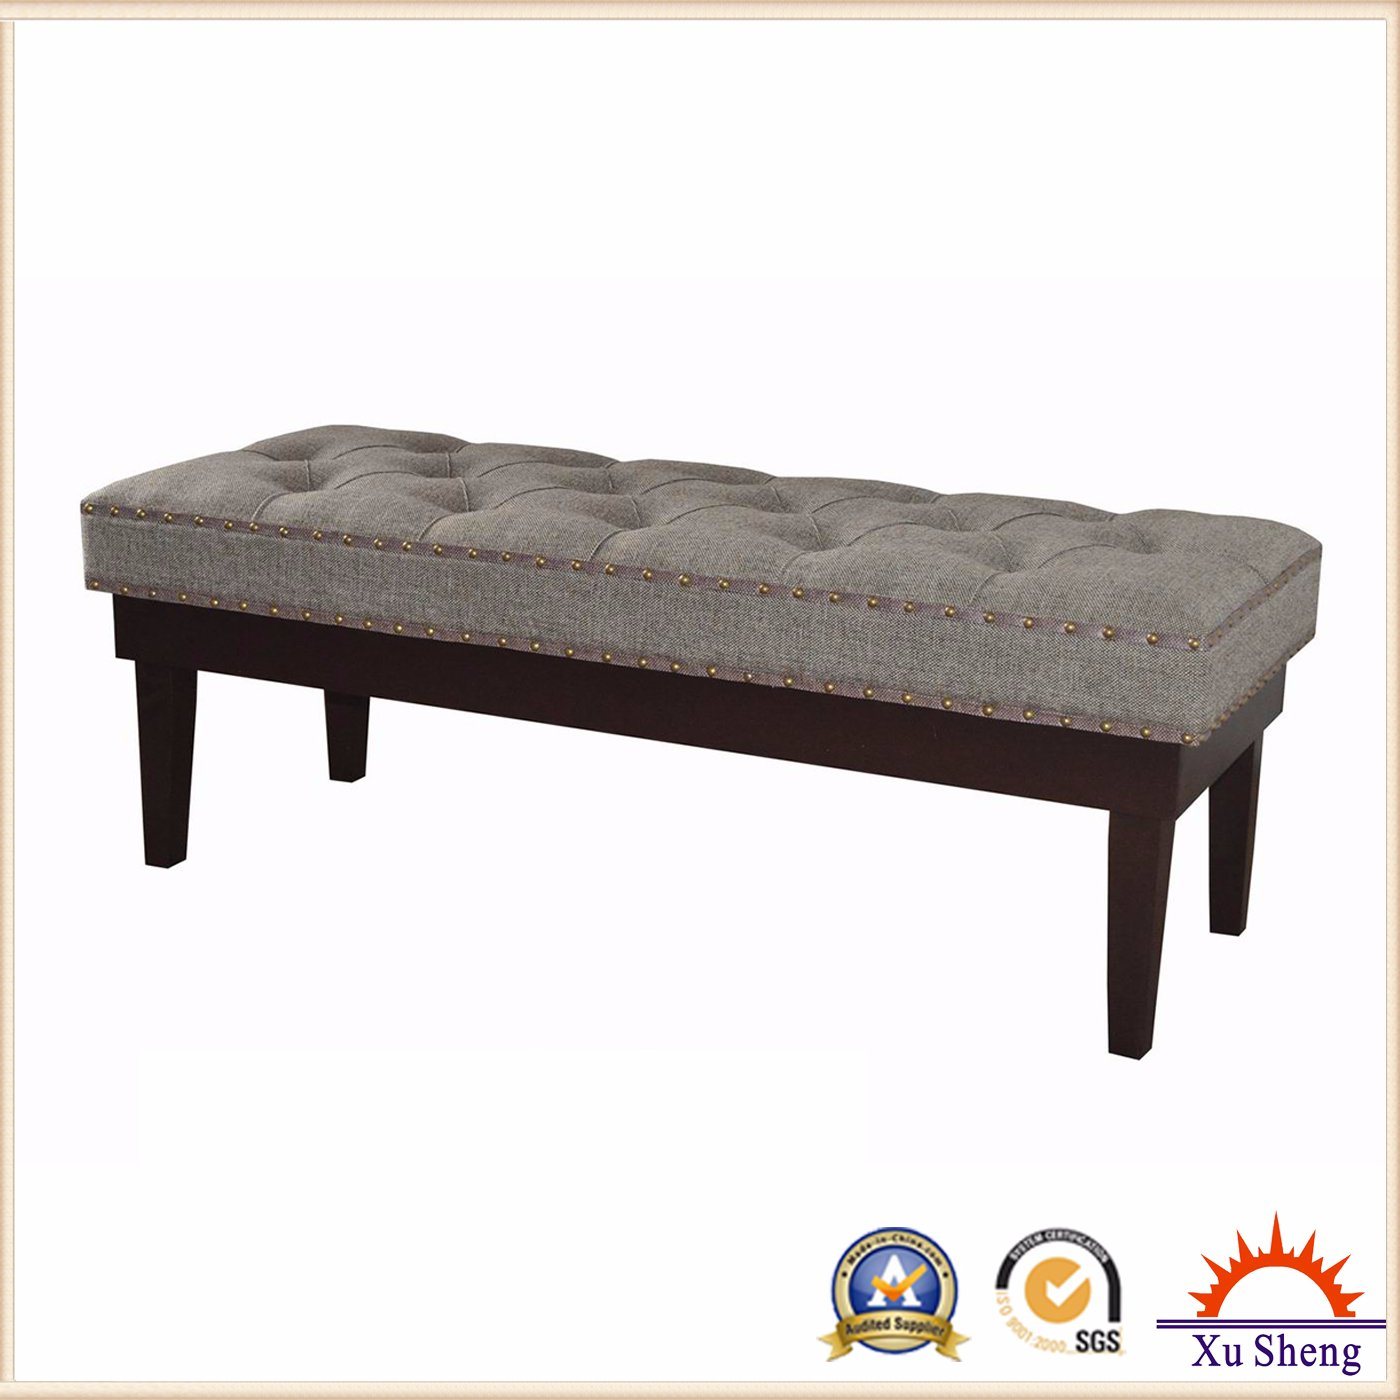 Large Linen Ottoman Bench with Nailhead Trim and Expresso Kd Legs